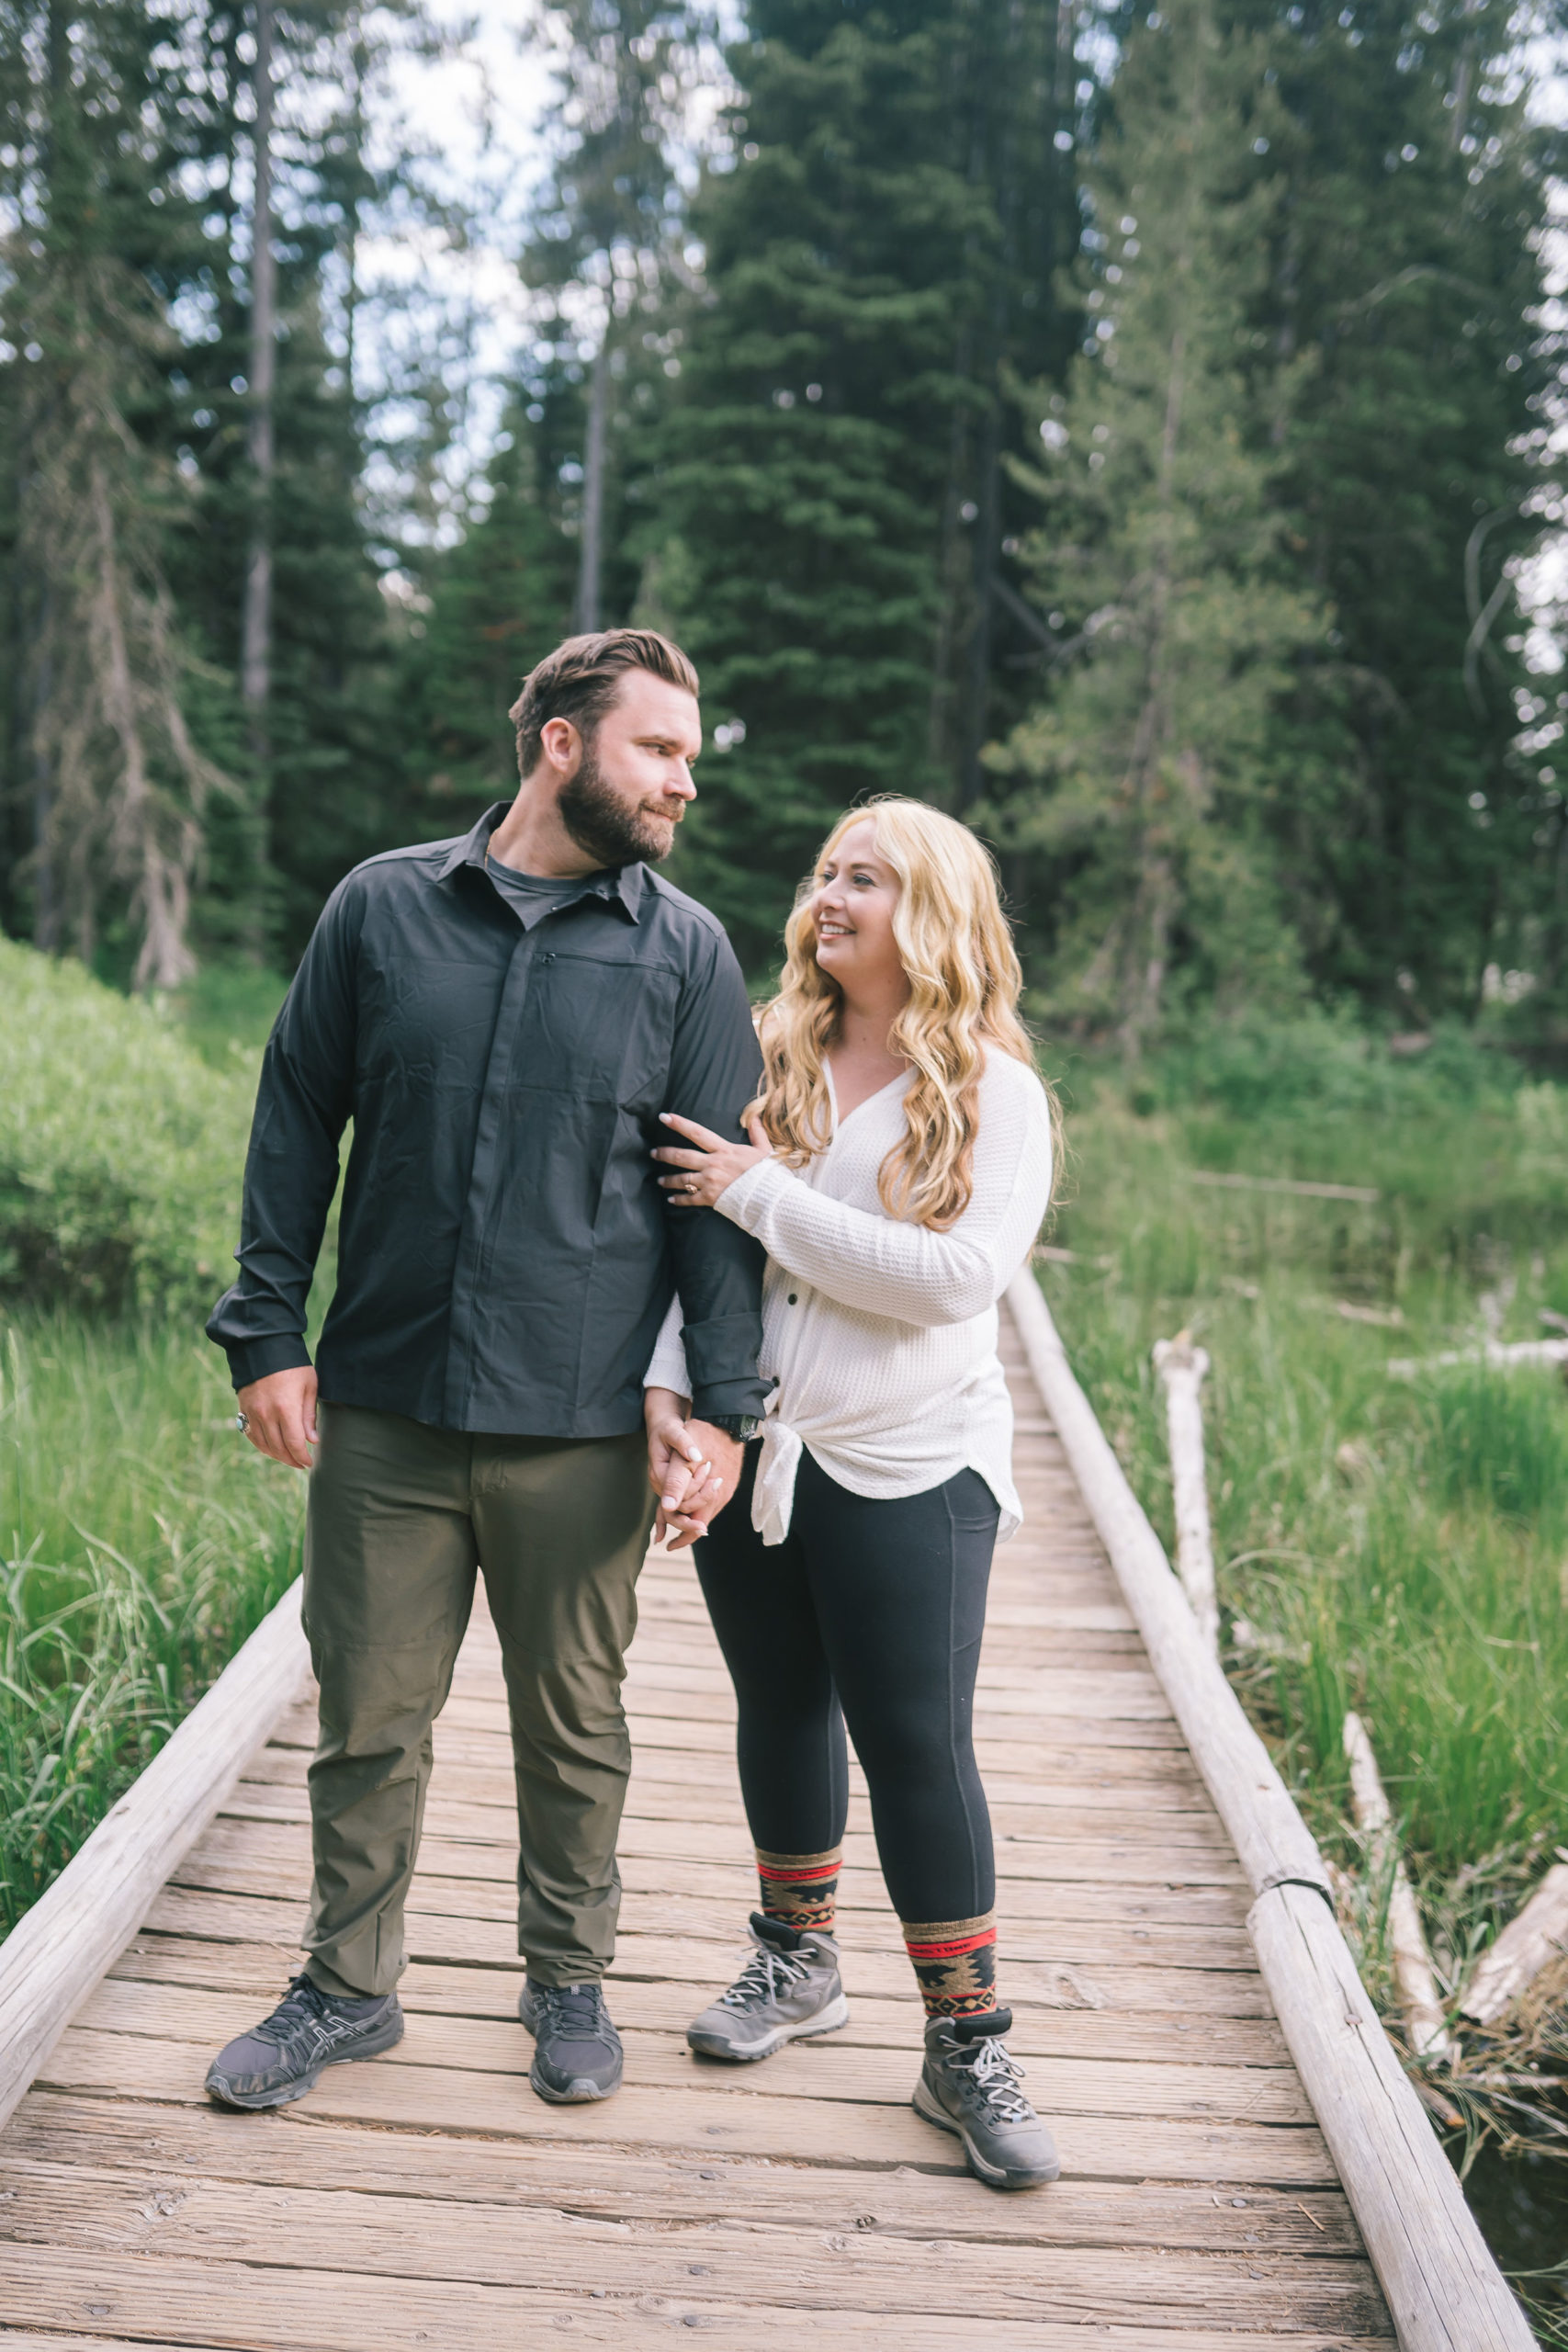 engagement pictures in the Smoky Mountains casual winter engagement photo outfits with man and woman walking on a dock together towards the camera and holding hands while smiling at one another